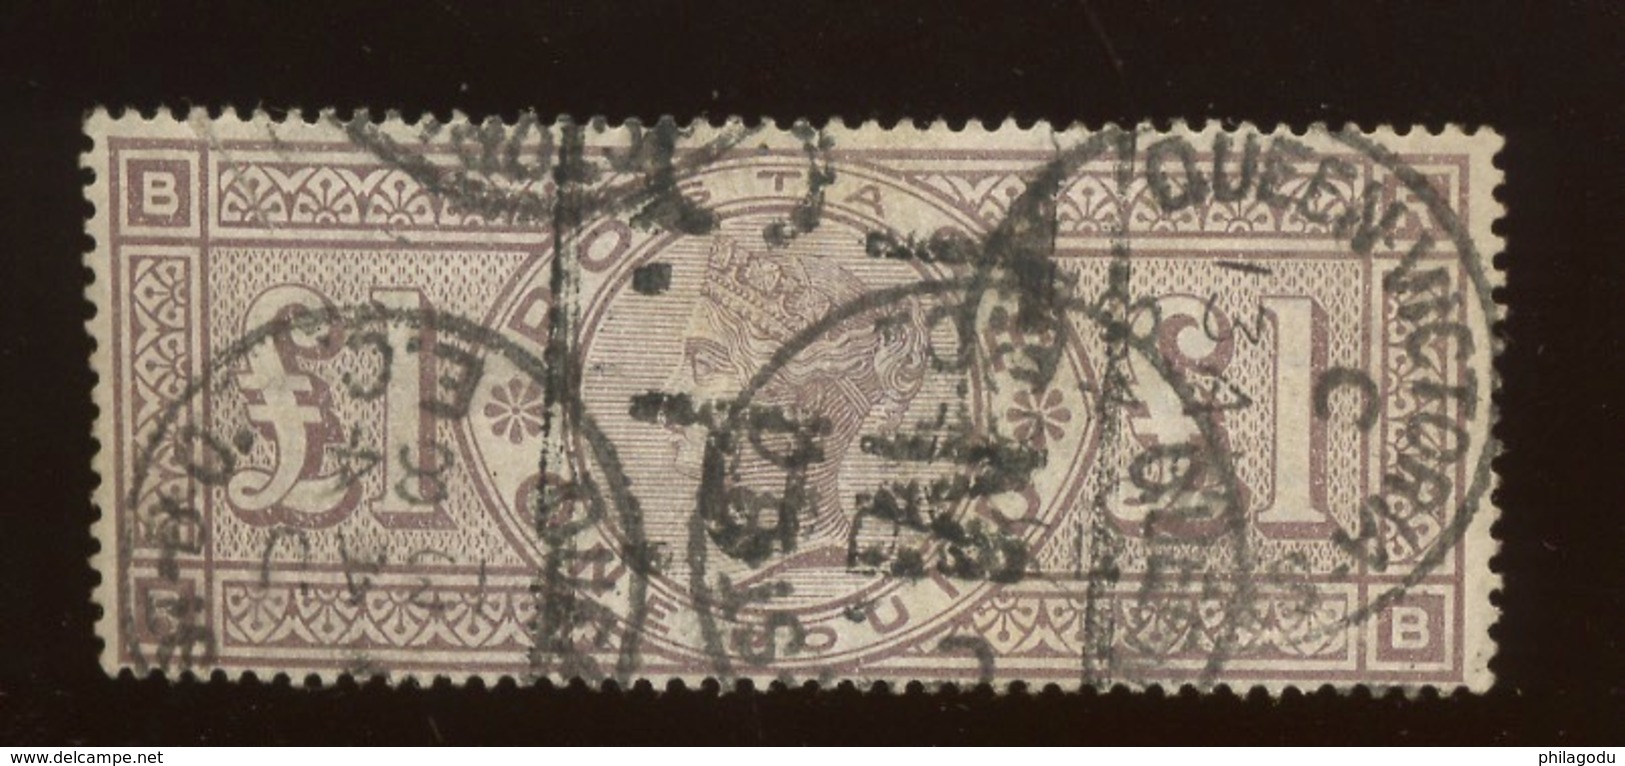 Yv 89 Pd Ø.ONE POUND  Cote 2500 Euros Mais Fente Bouchée. Tear Reglued  Sold As Space Filler - Used Stamps